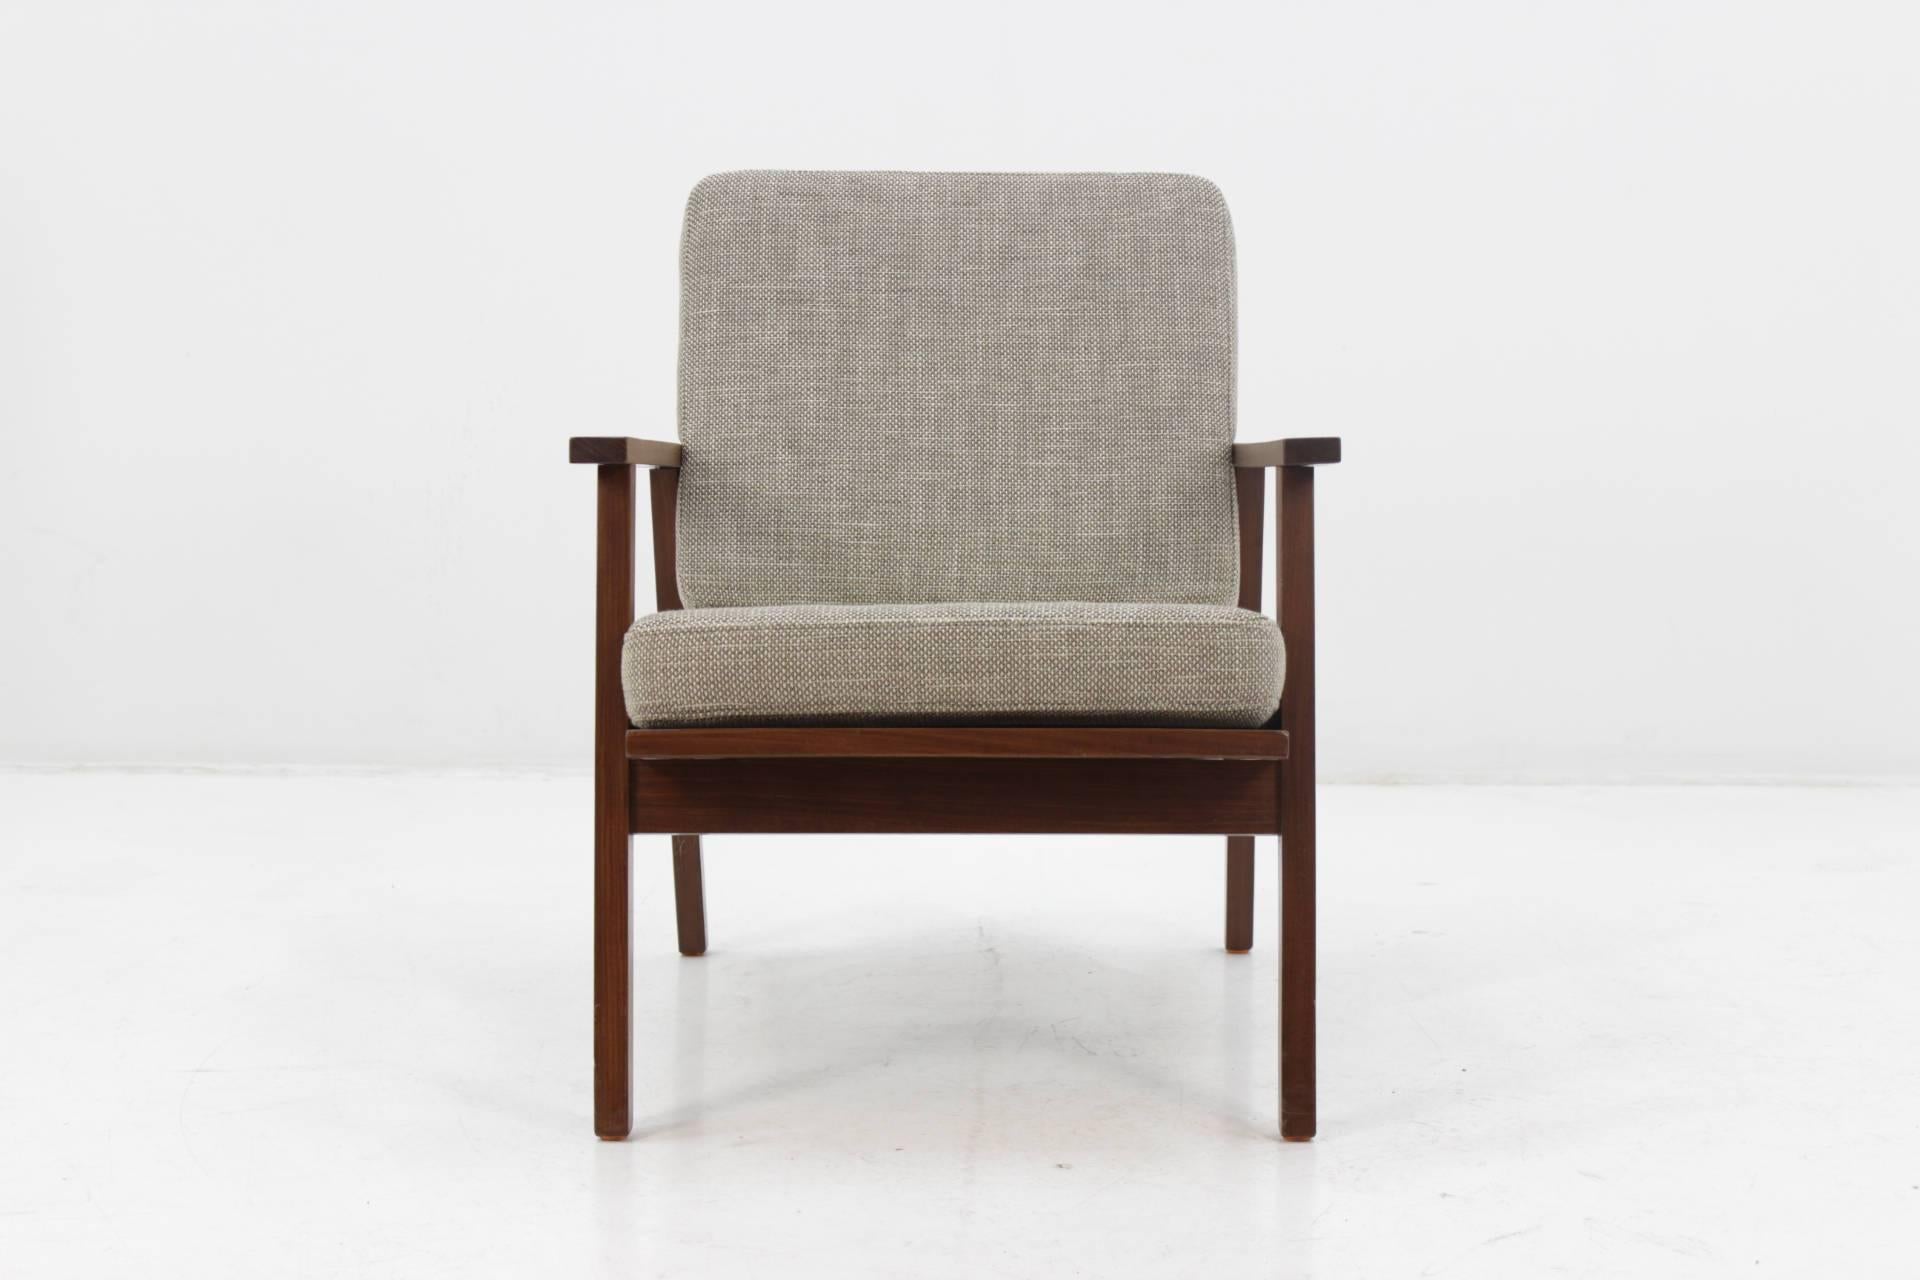 The chair features teak frame and new fabric upholstery .Item was carefully refurbished.